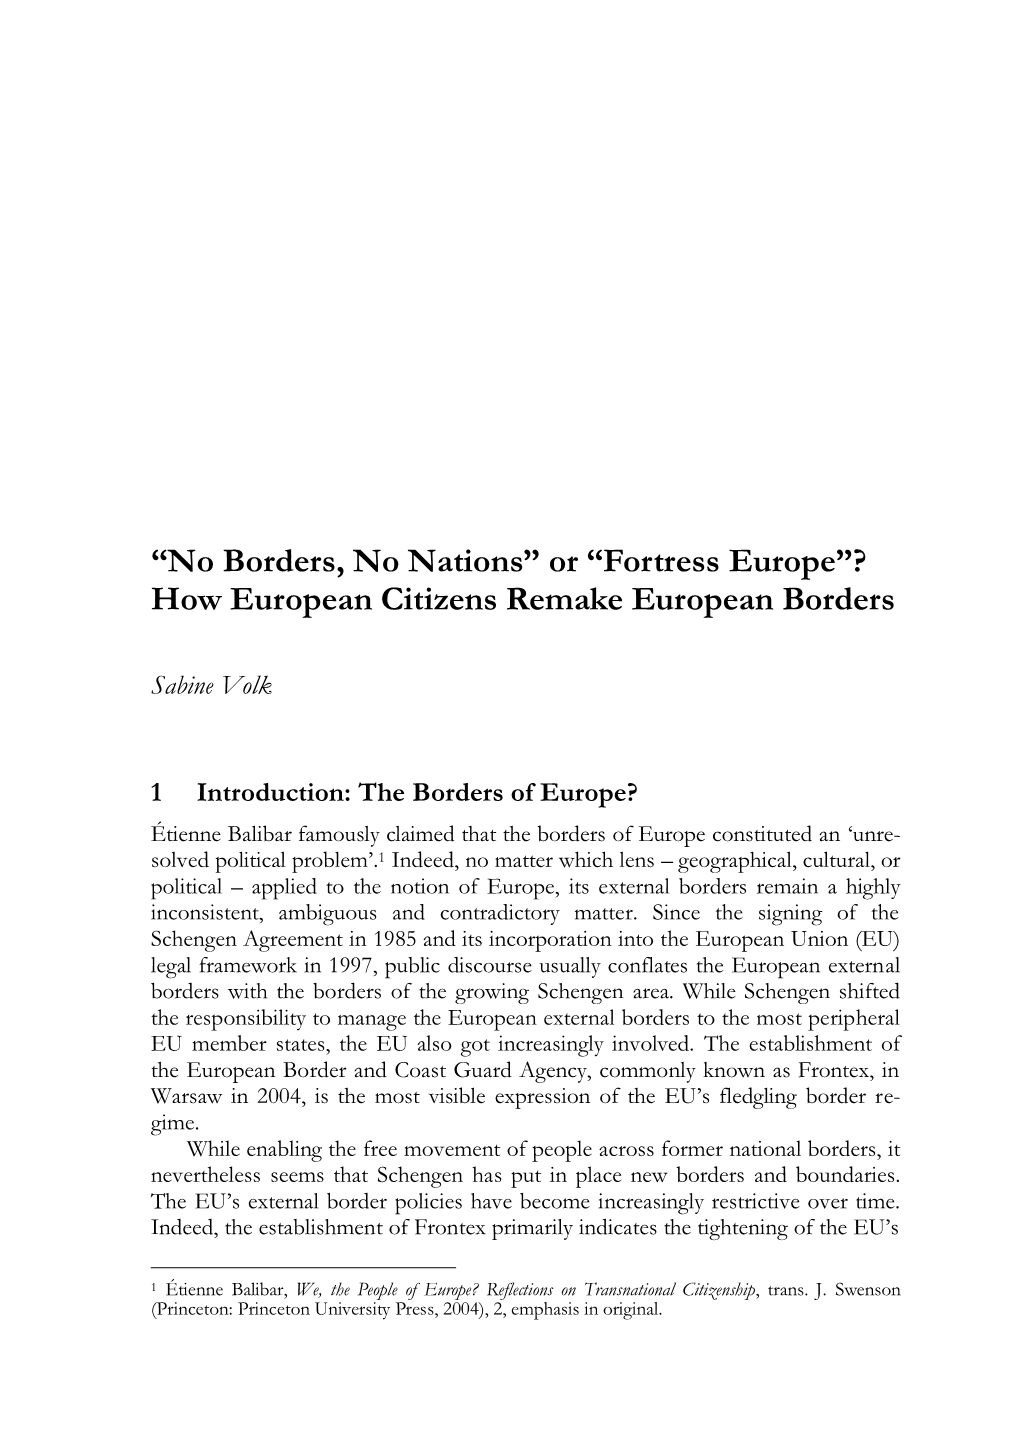 “No Borders, No Nations” Or “Fortress Europe”? How European Citizens Remake European Borders